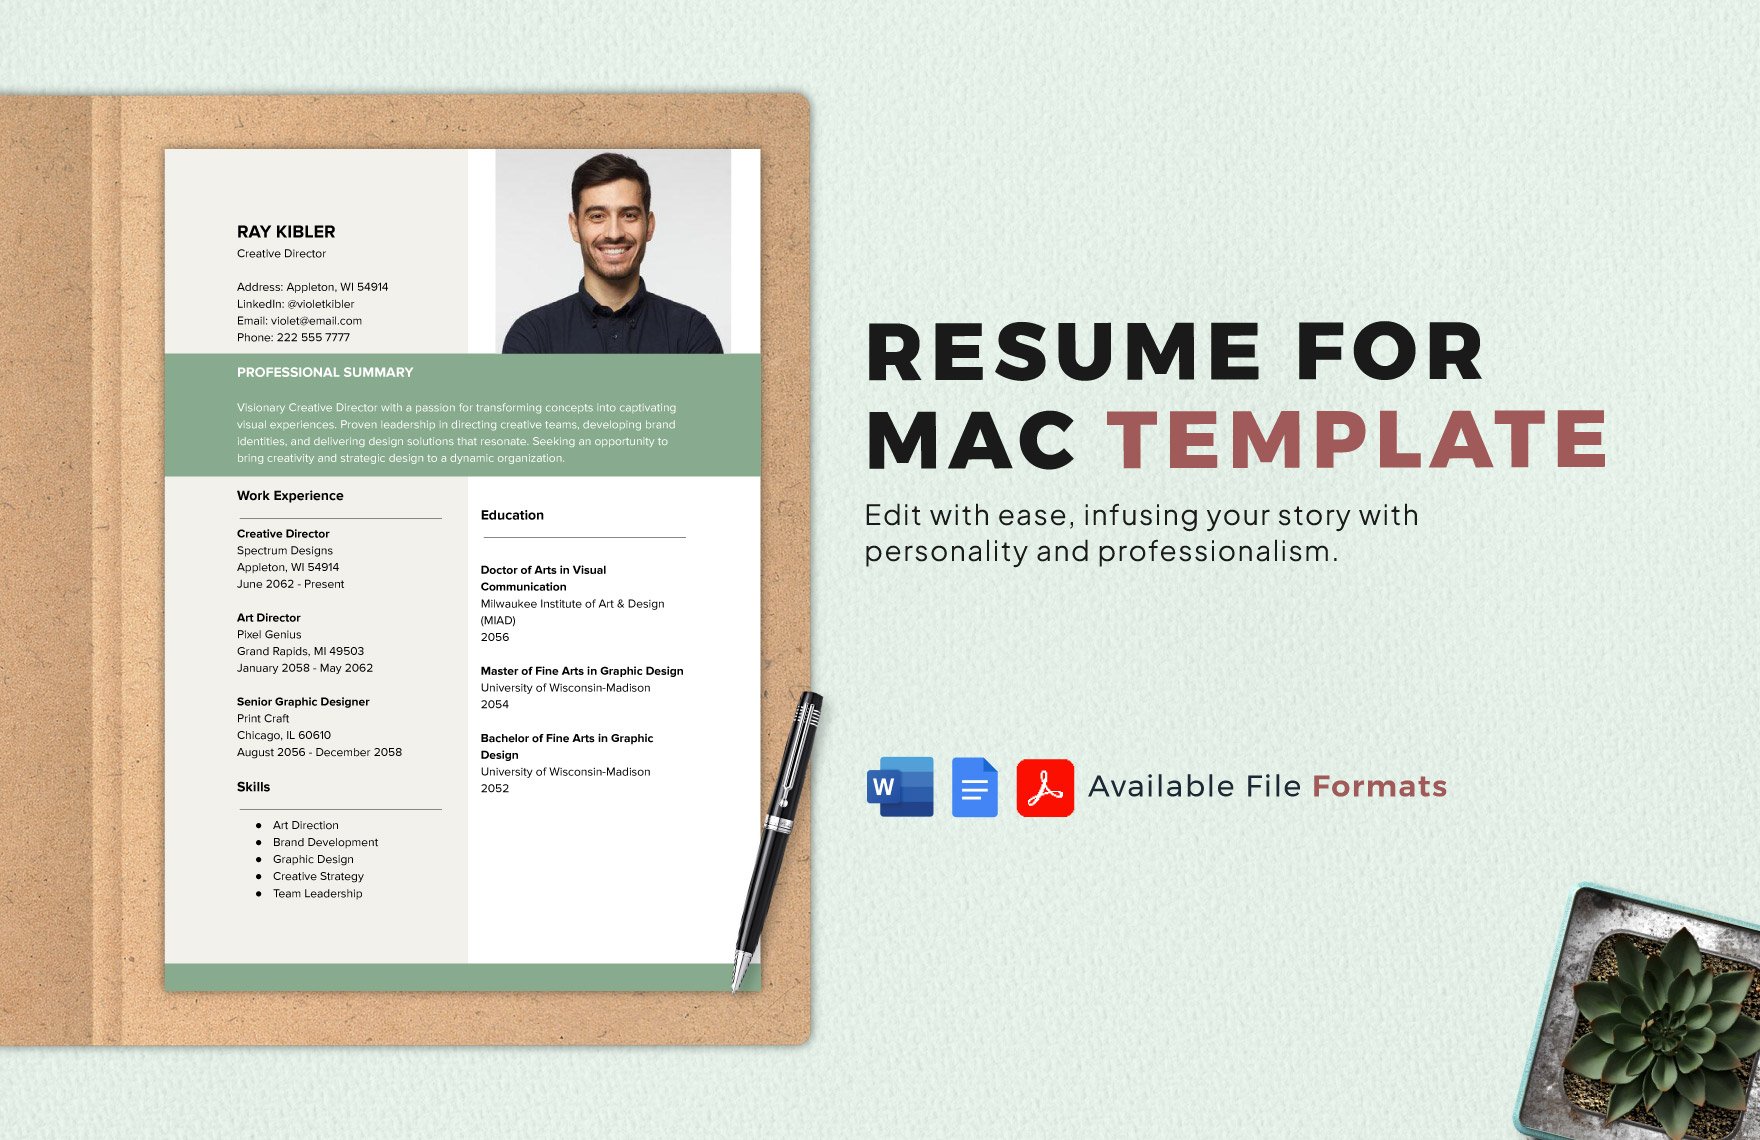 Resume for Mac Template